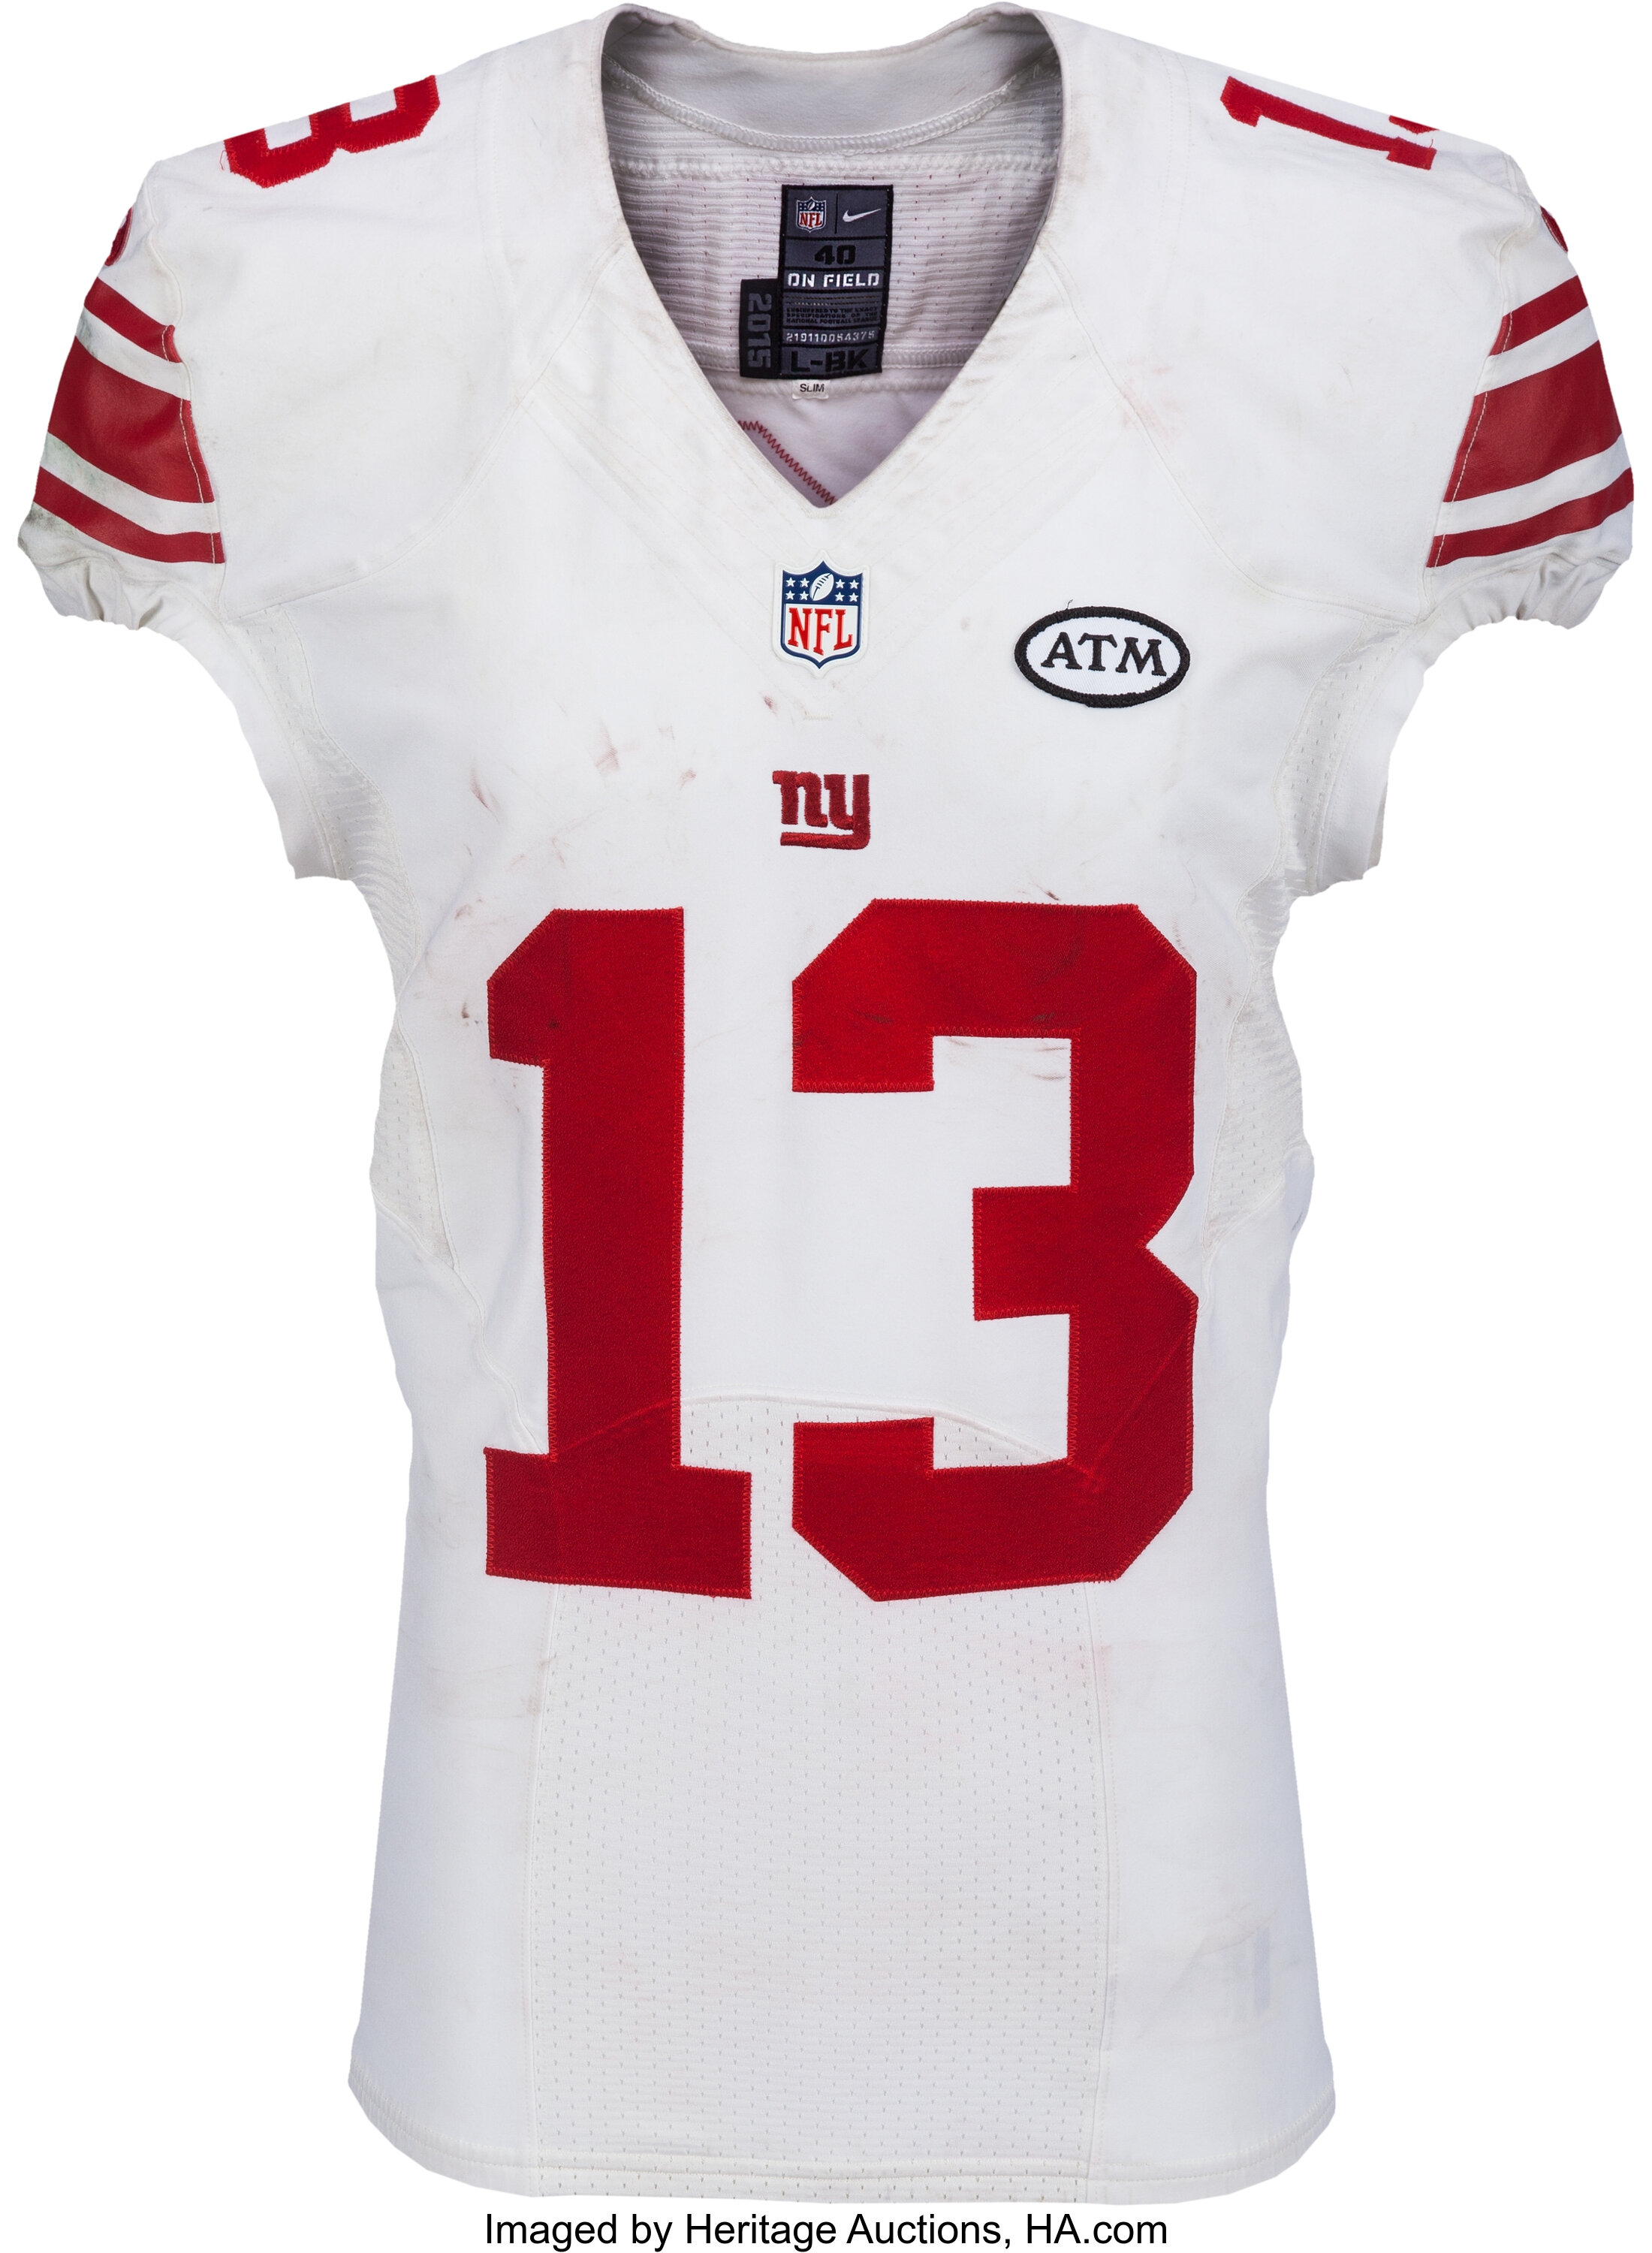 Odell Beckham Jr Cleveland Indians Youth MLB x NFL Replica Player Jersey -  Red